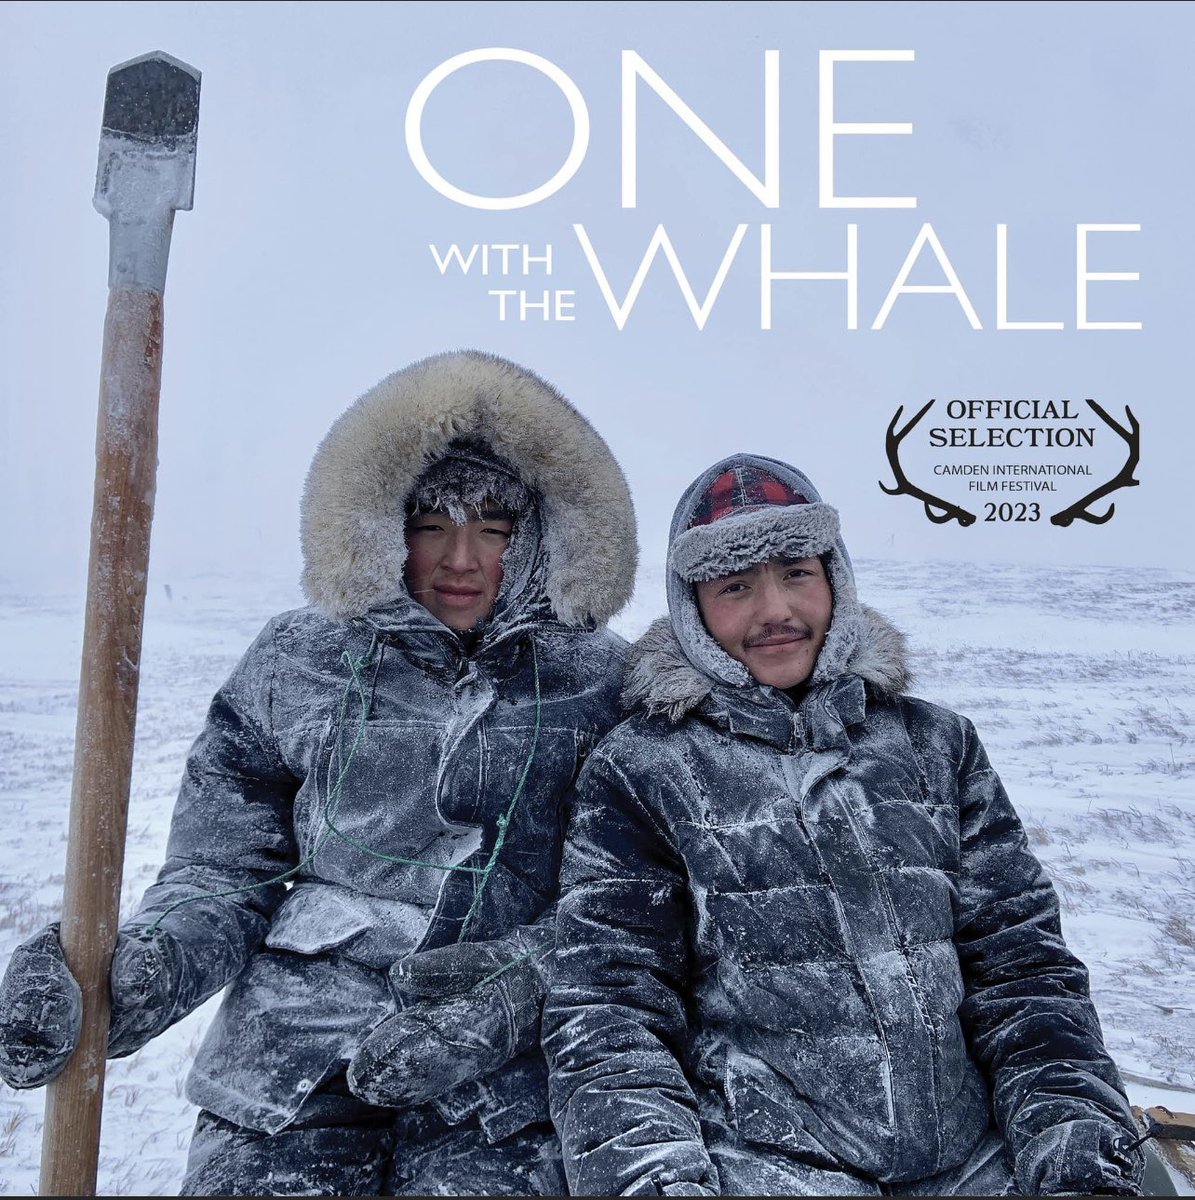 Five years of work. Filming in -20F, 60 miles from shore. Endless weeks on zoom calls. Remote edits through two Covid lockdowns across 9 time zones. And we launch on Sunday. #onewiththewhale #camdeninternationalfilmfestival #ciff #alaskanative #Indigenous #climatechange